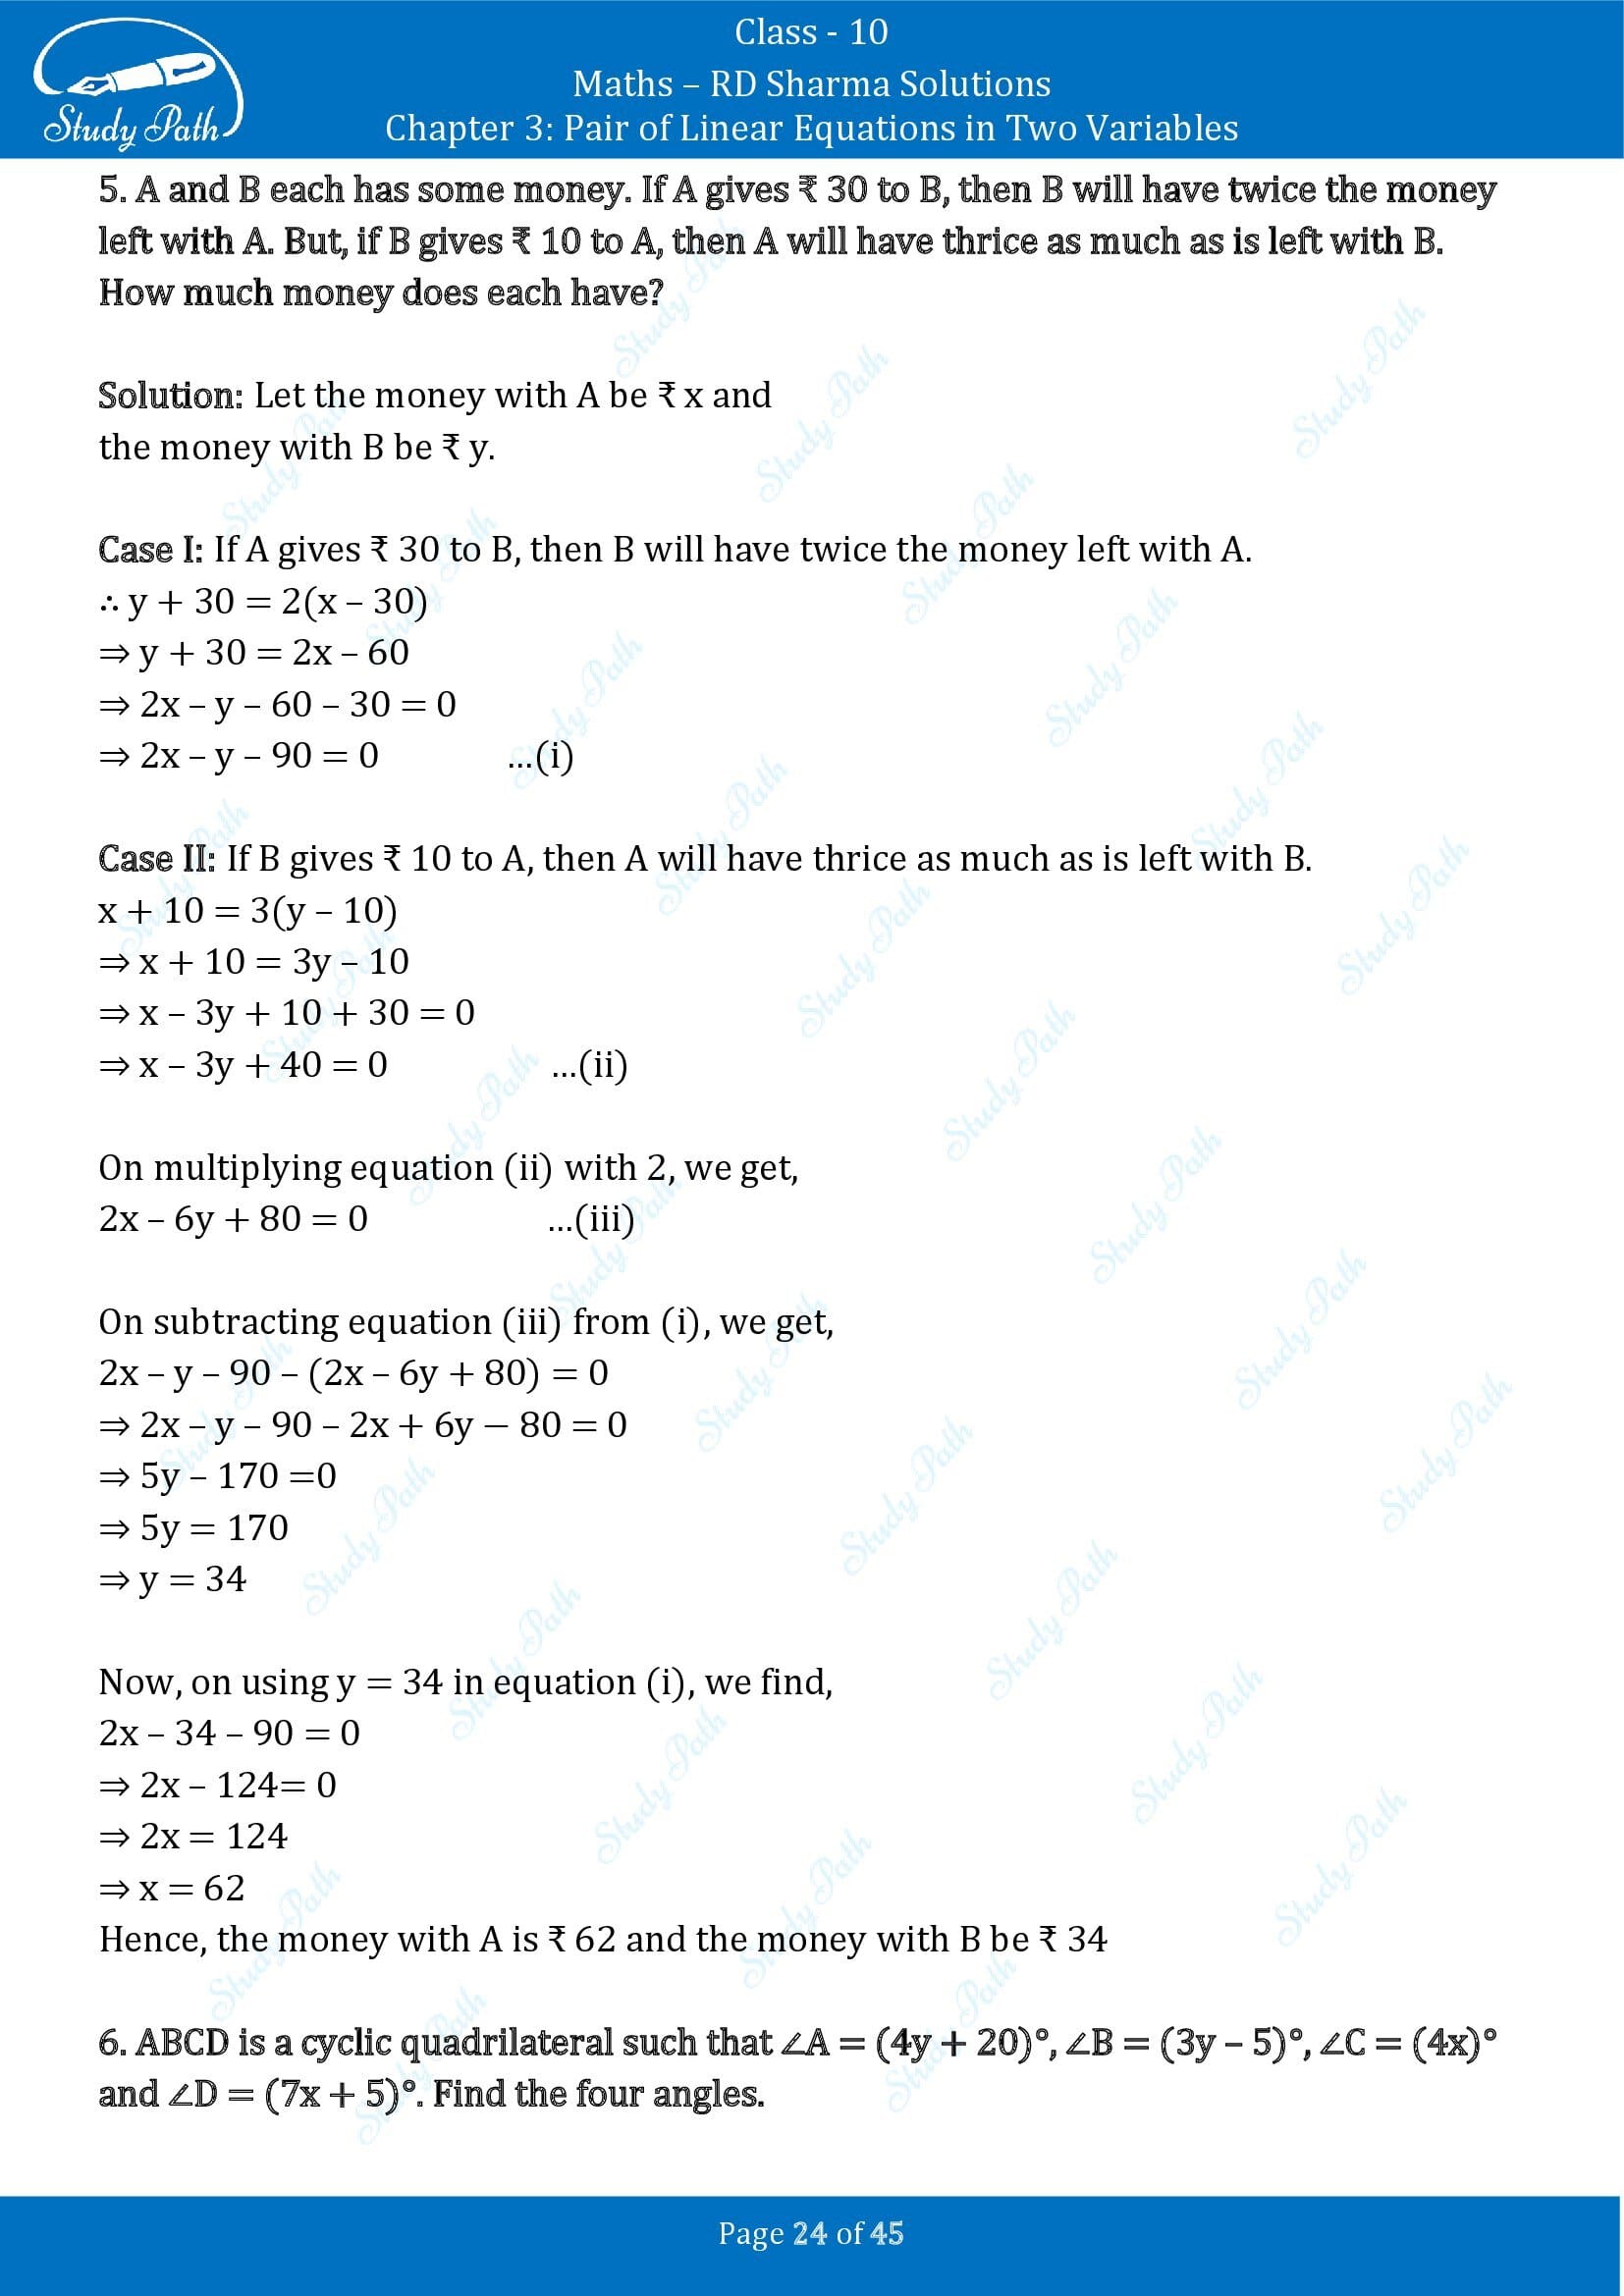 RD Sharma Solutions Class 10 Chapter 3 Pair of Linear Equations in Two Variables Exercise 3.11 00024